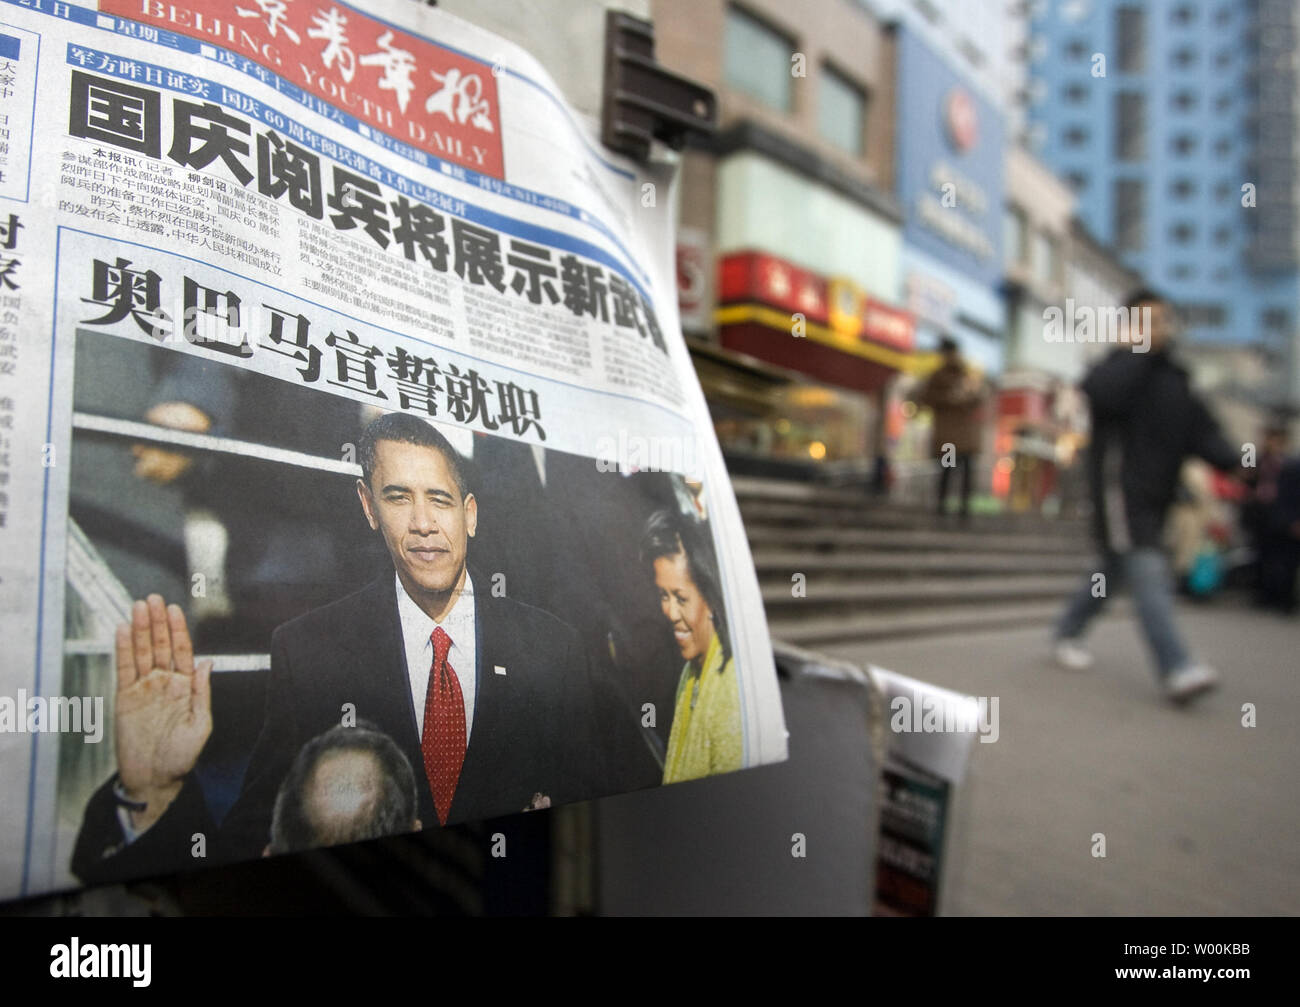 A Chinese news vendor sells newspapers featuring front-page coverage of U.S. President Barack Obama's inauguration as the 44th President of America in Beijing January 21, 2009. China offered a nervous welcome to U.S. President Barack Obama, expressing concern over the direction he may take bilateral ties while paying tribute to the efforts of George W. Bush. China censored parts of  Obama's inauguration speech on websites and state TV. (UPI Photo/Stephen Shaver) Stock Photo